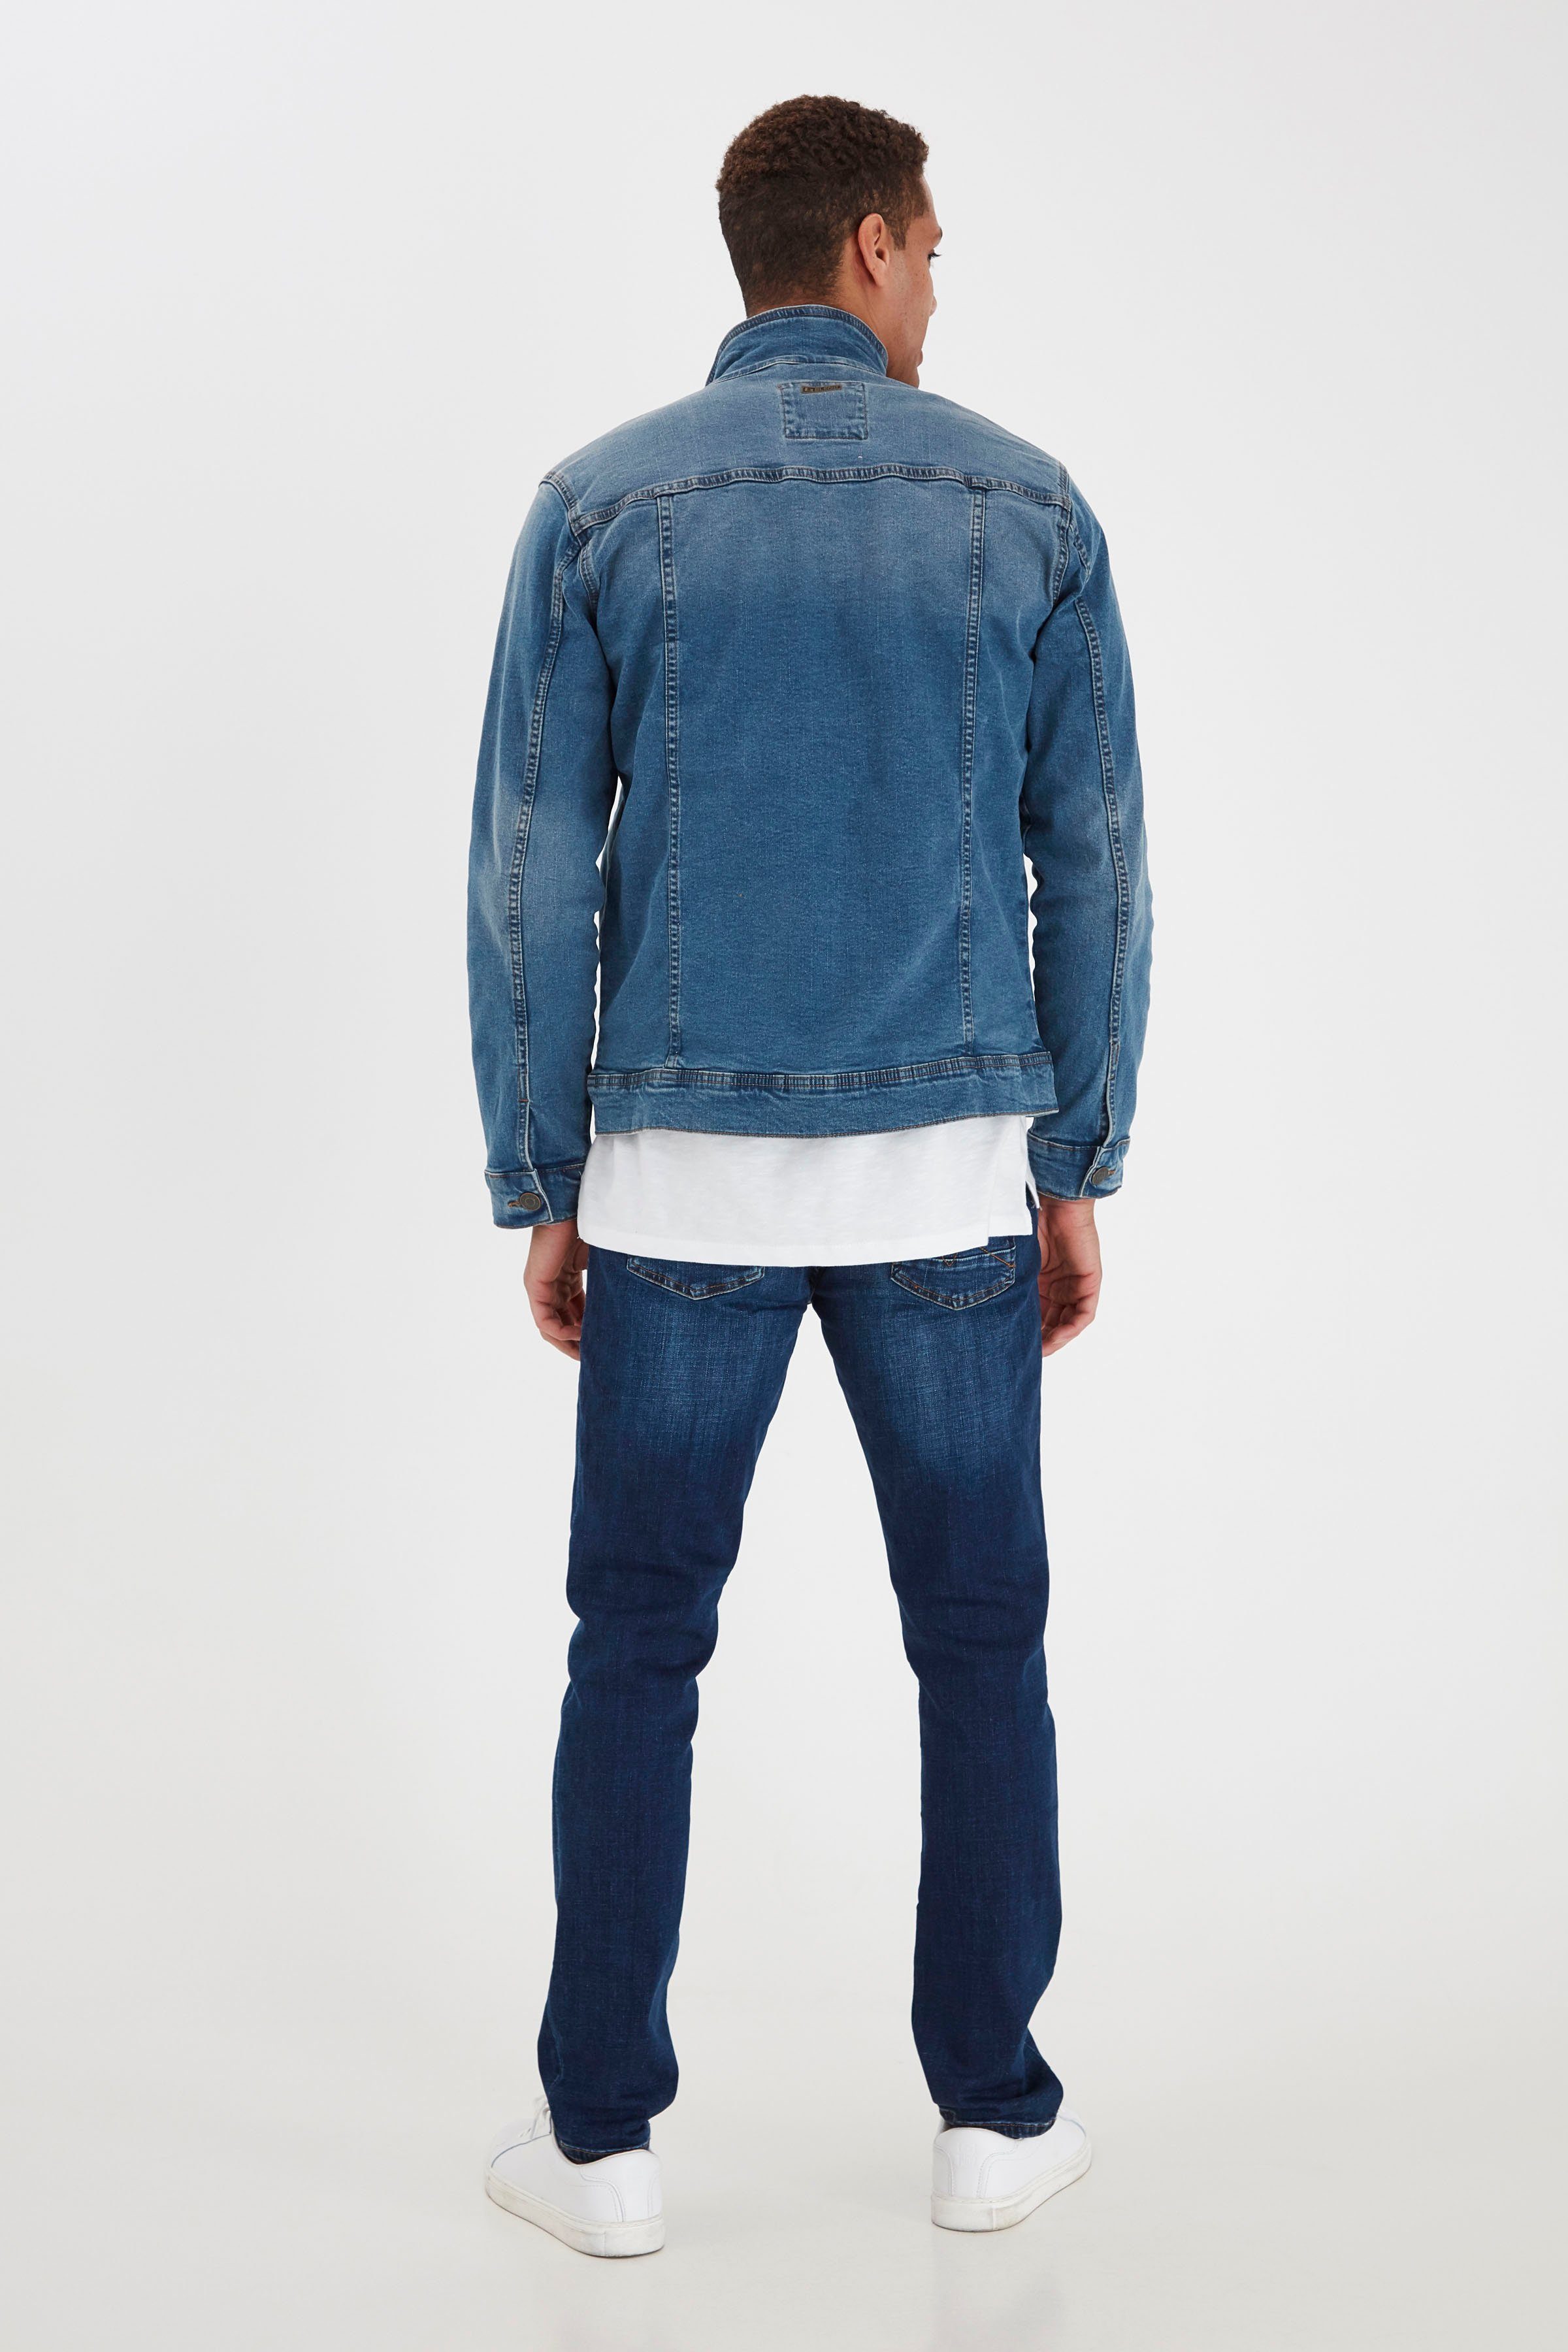 BHNARIL mid-blue Jeansjacke washed Blend